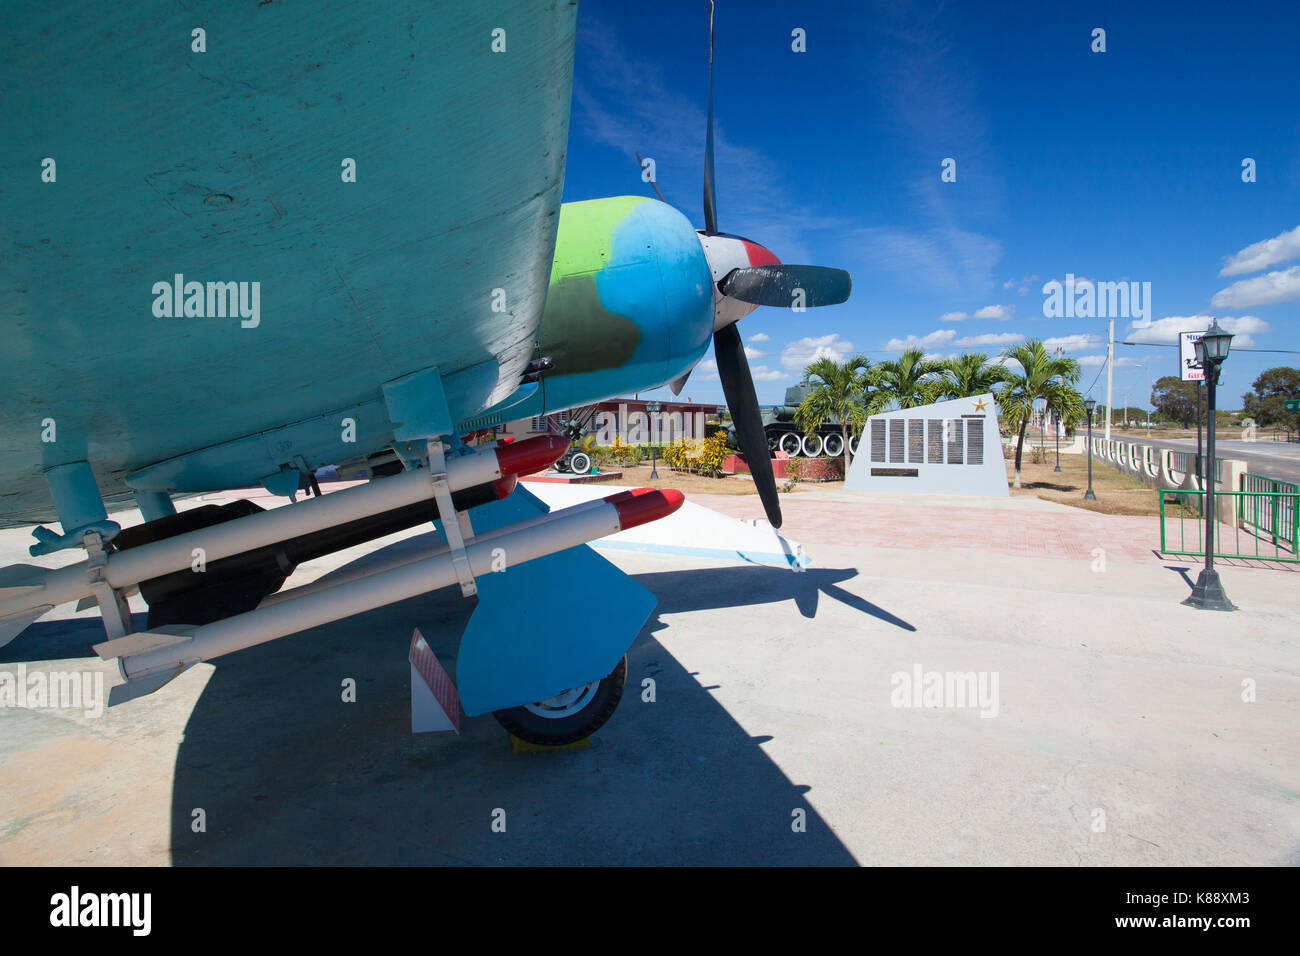 Playa Giron, Cuba - January 27,2017: The Bay of Pigs Museum. Tank and aircraft in front of the museum dedicated to the failed 1961 invasion. Stock Photo